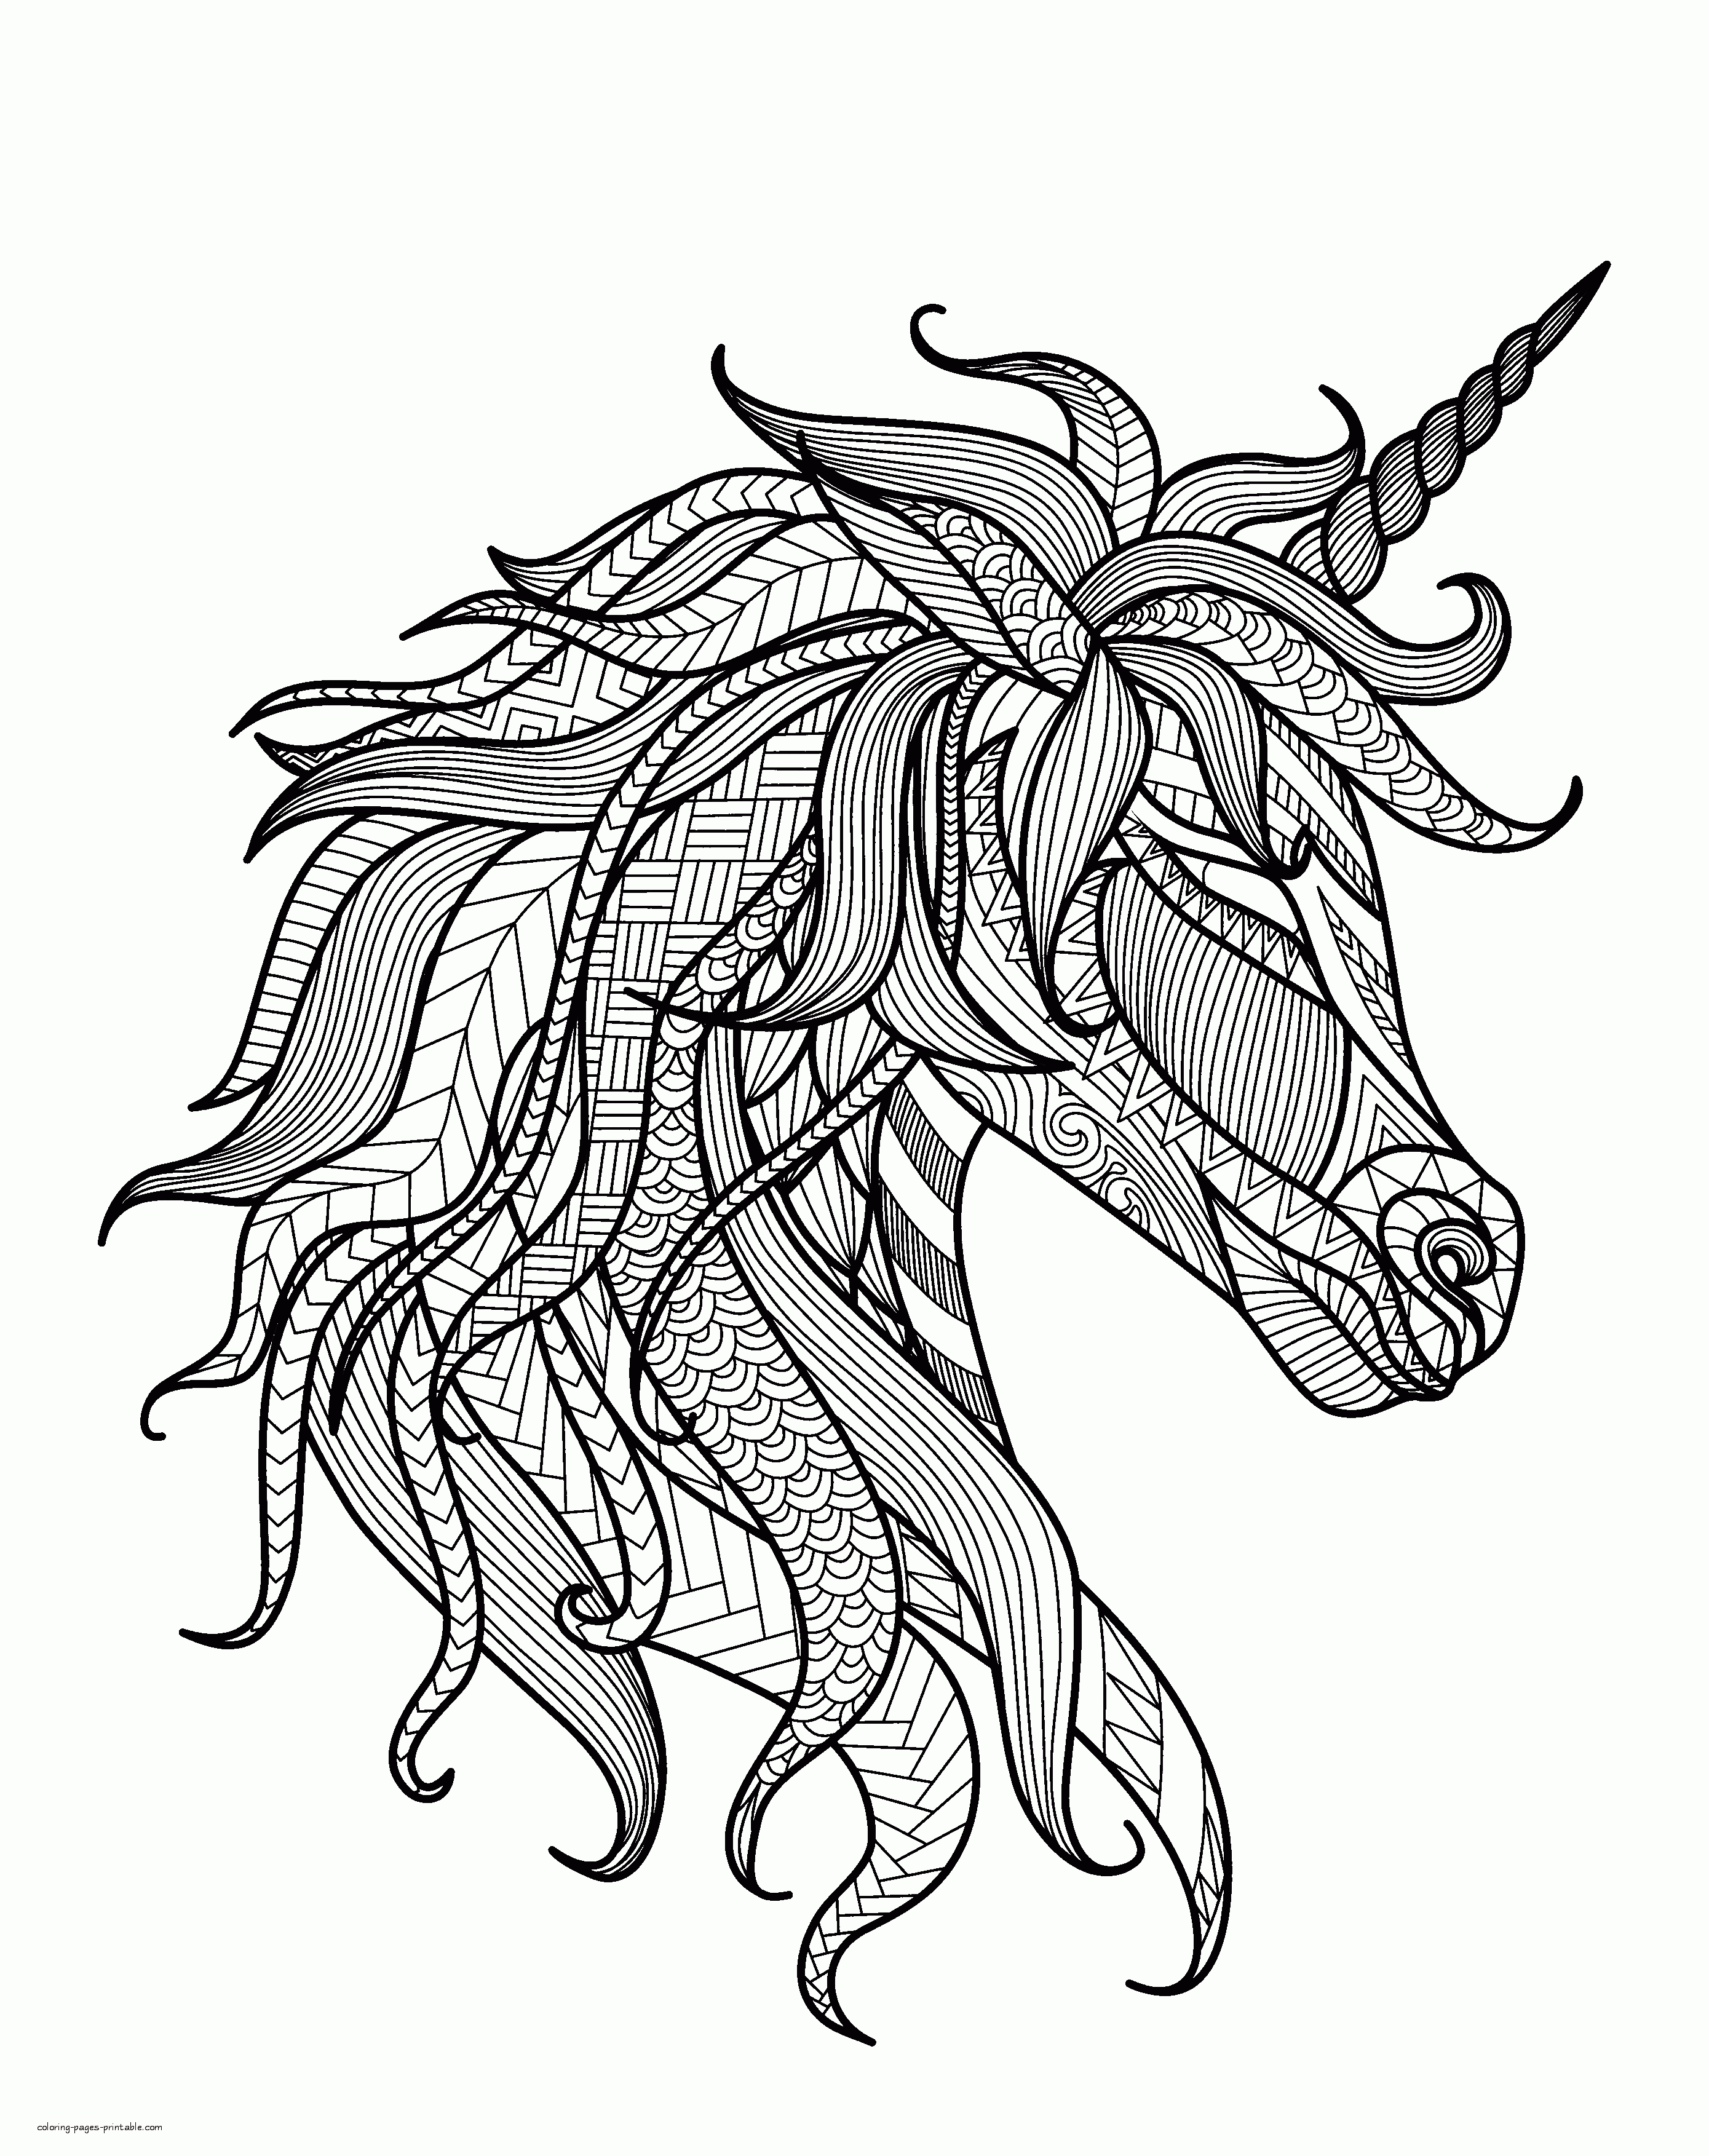 Unicorn Coloring Page For Adults    COLORING PAGES PRINTABLE.COM